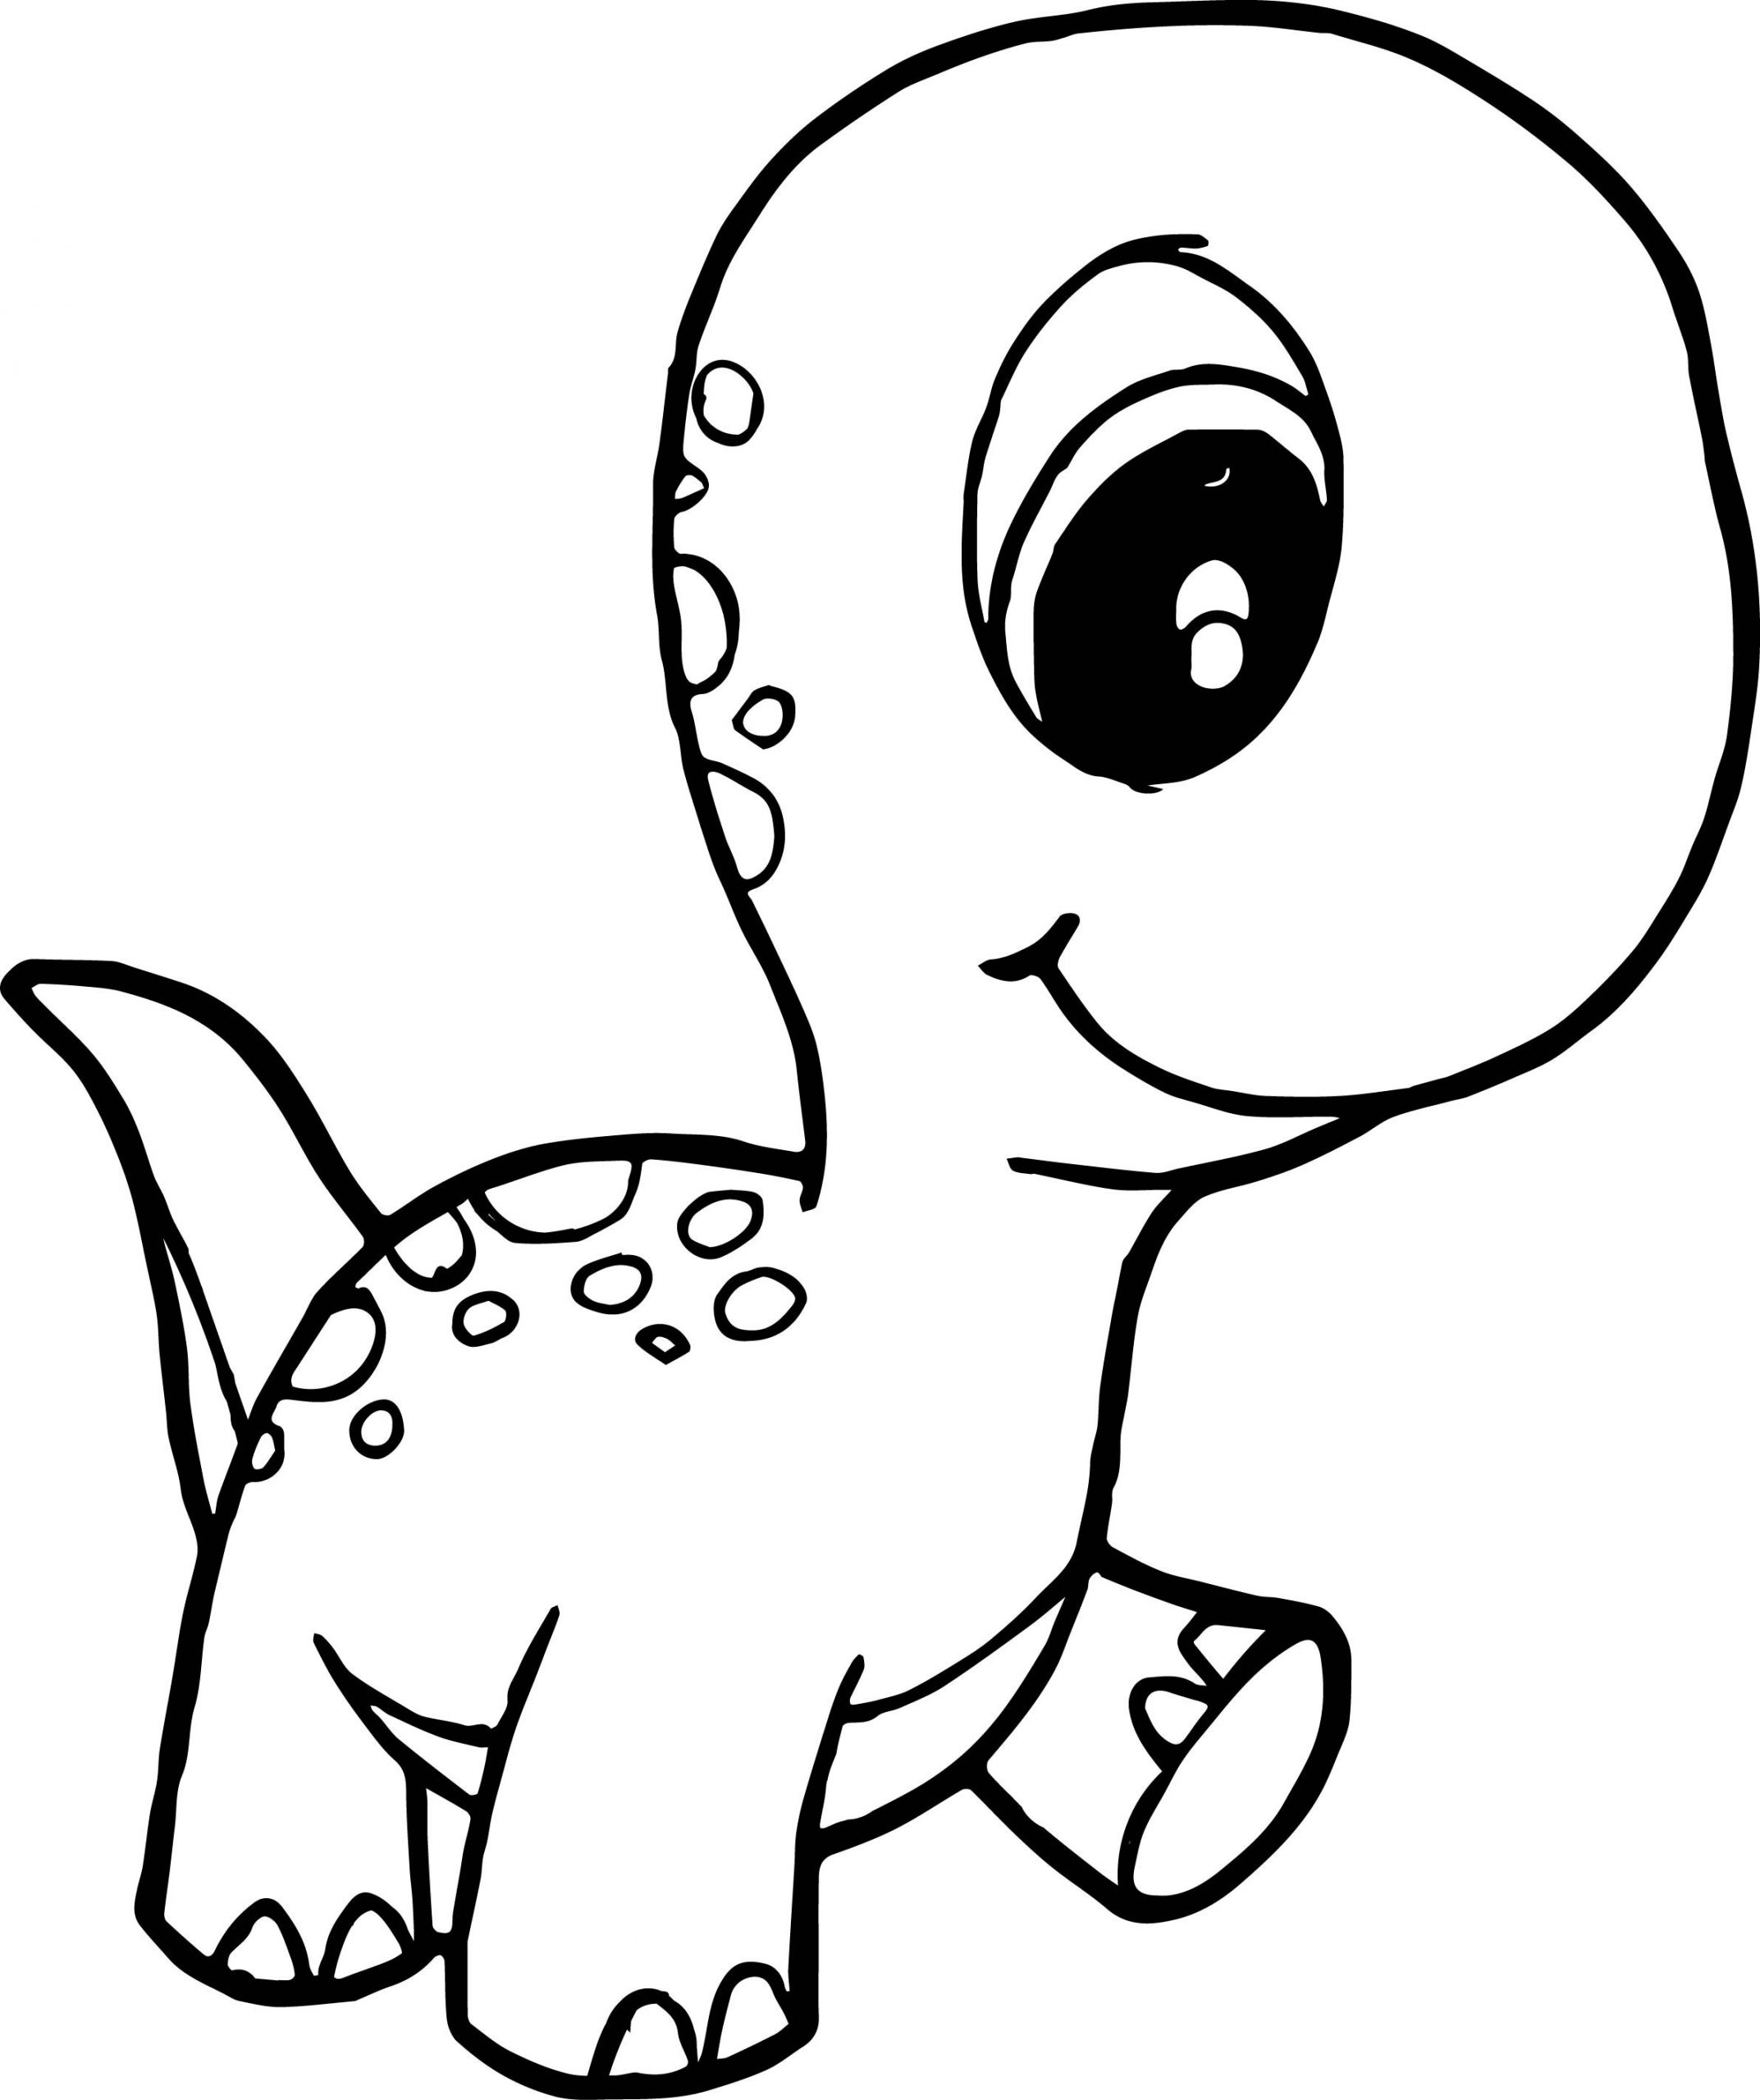 Cute Baby Animal Coloring Pages
 Cute Baby Drawing at GetDrawings